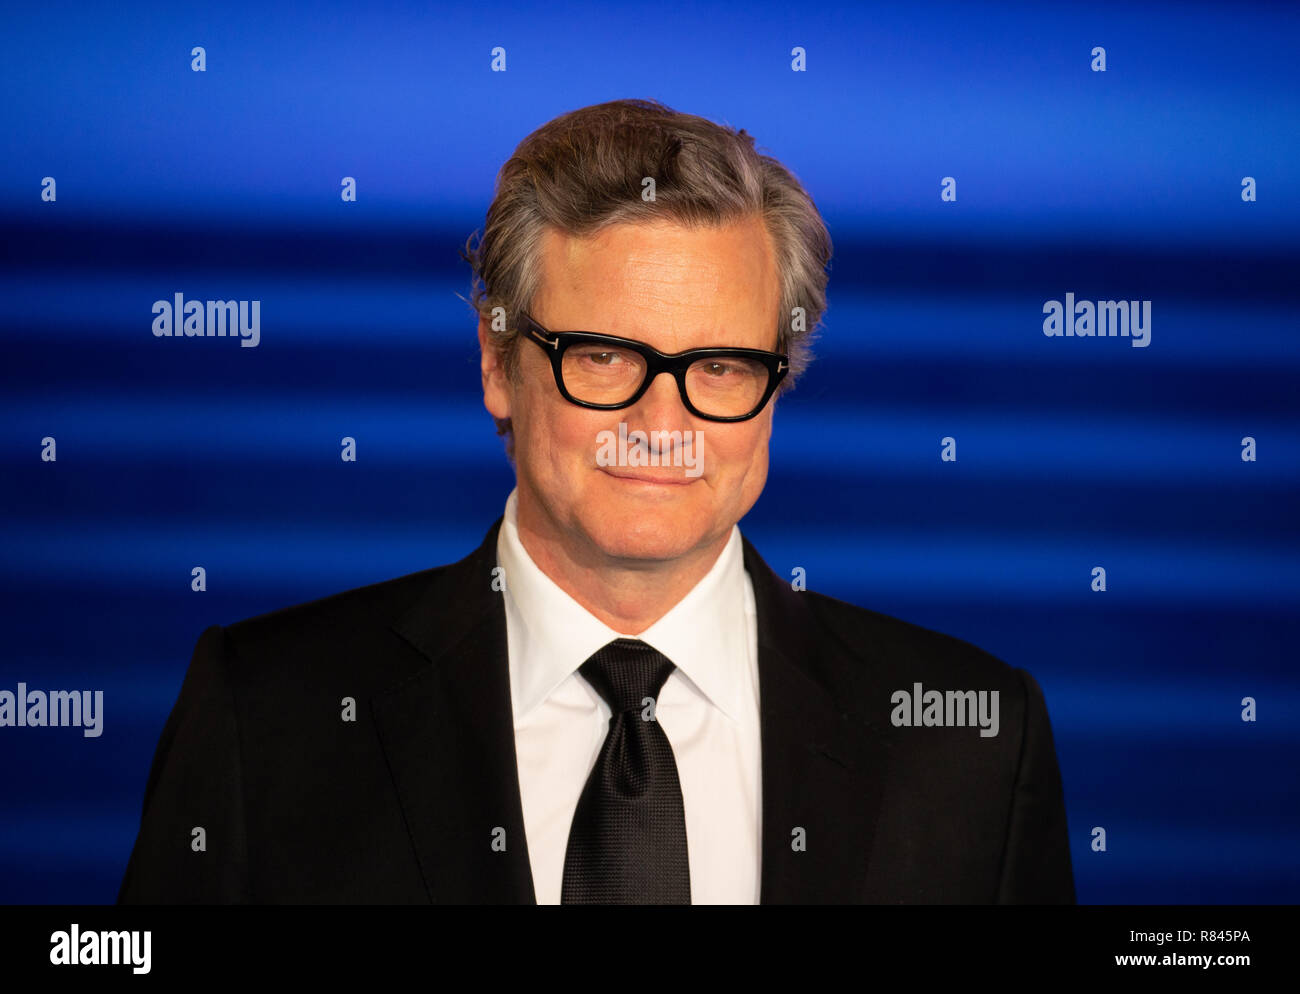 British actor, Colin Firth, at the premier of 'Mary Poppins Returns' at the Royal Albert Hall in London. He plays William Weatherall Wilkins. Stock Photo